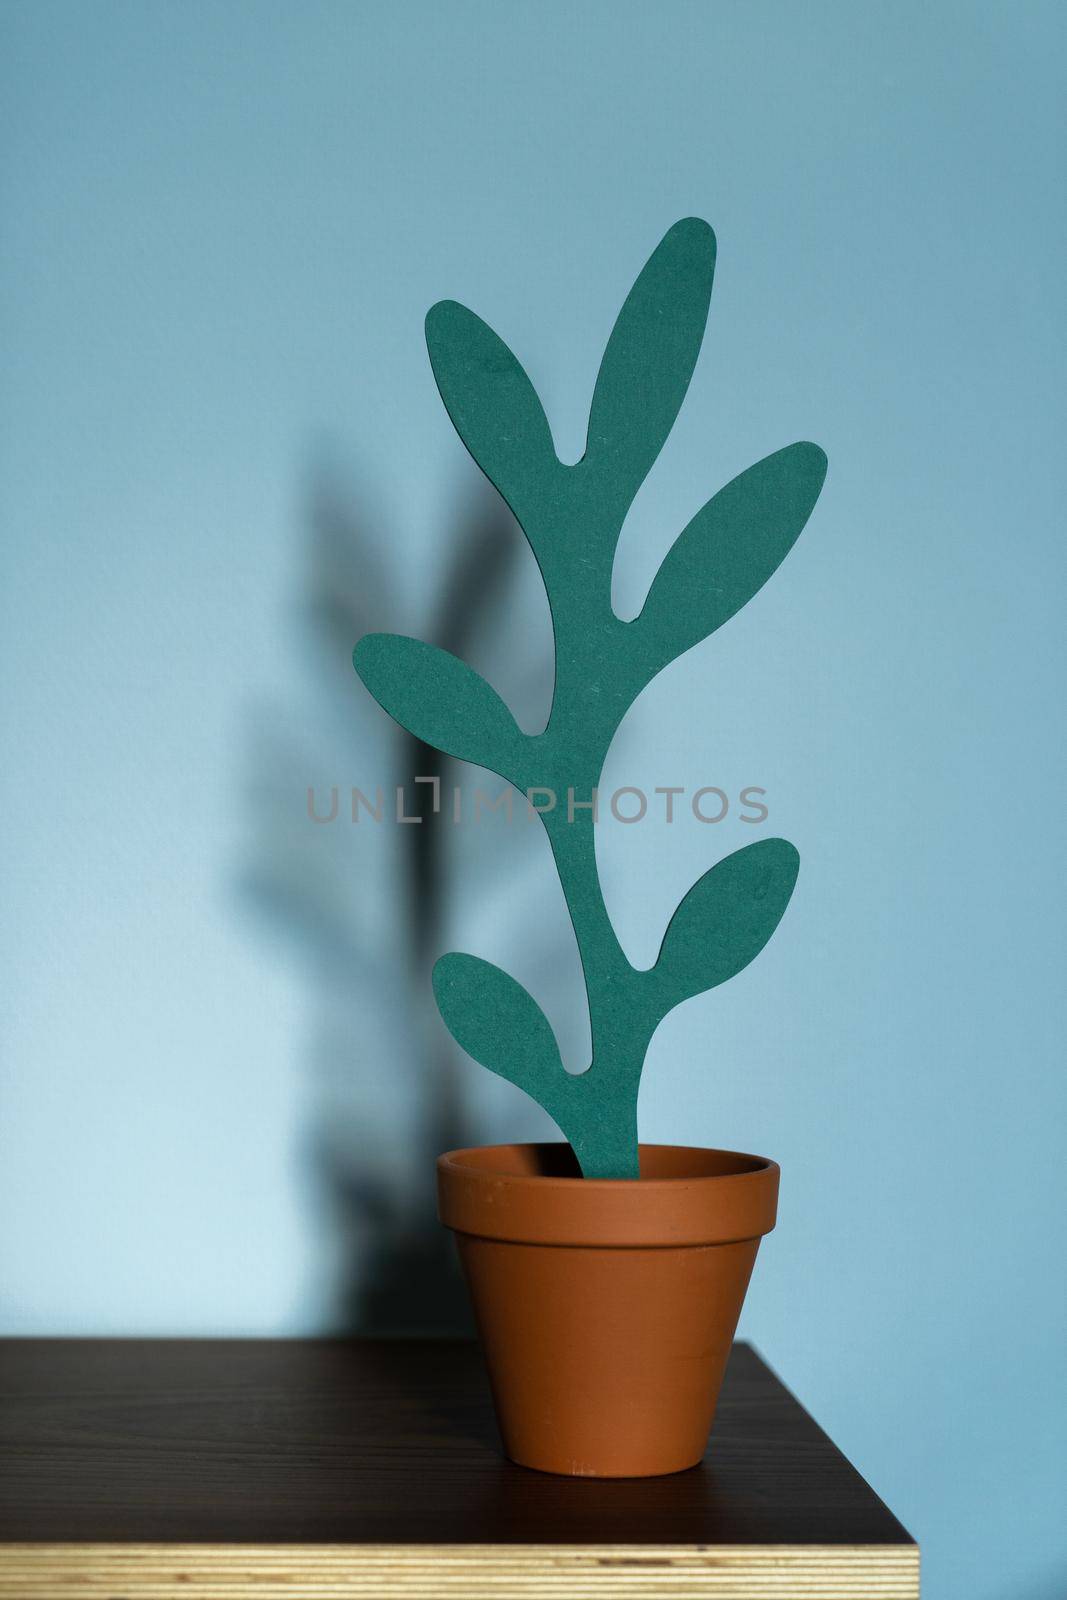 Artificial wooden plant shape in a terracotta pot on a wooden table on a blue background. The concept of office interior, home comfort, lifestyle. Mock-up with copy space for your text. by LeoniekvanderVliet